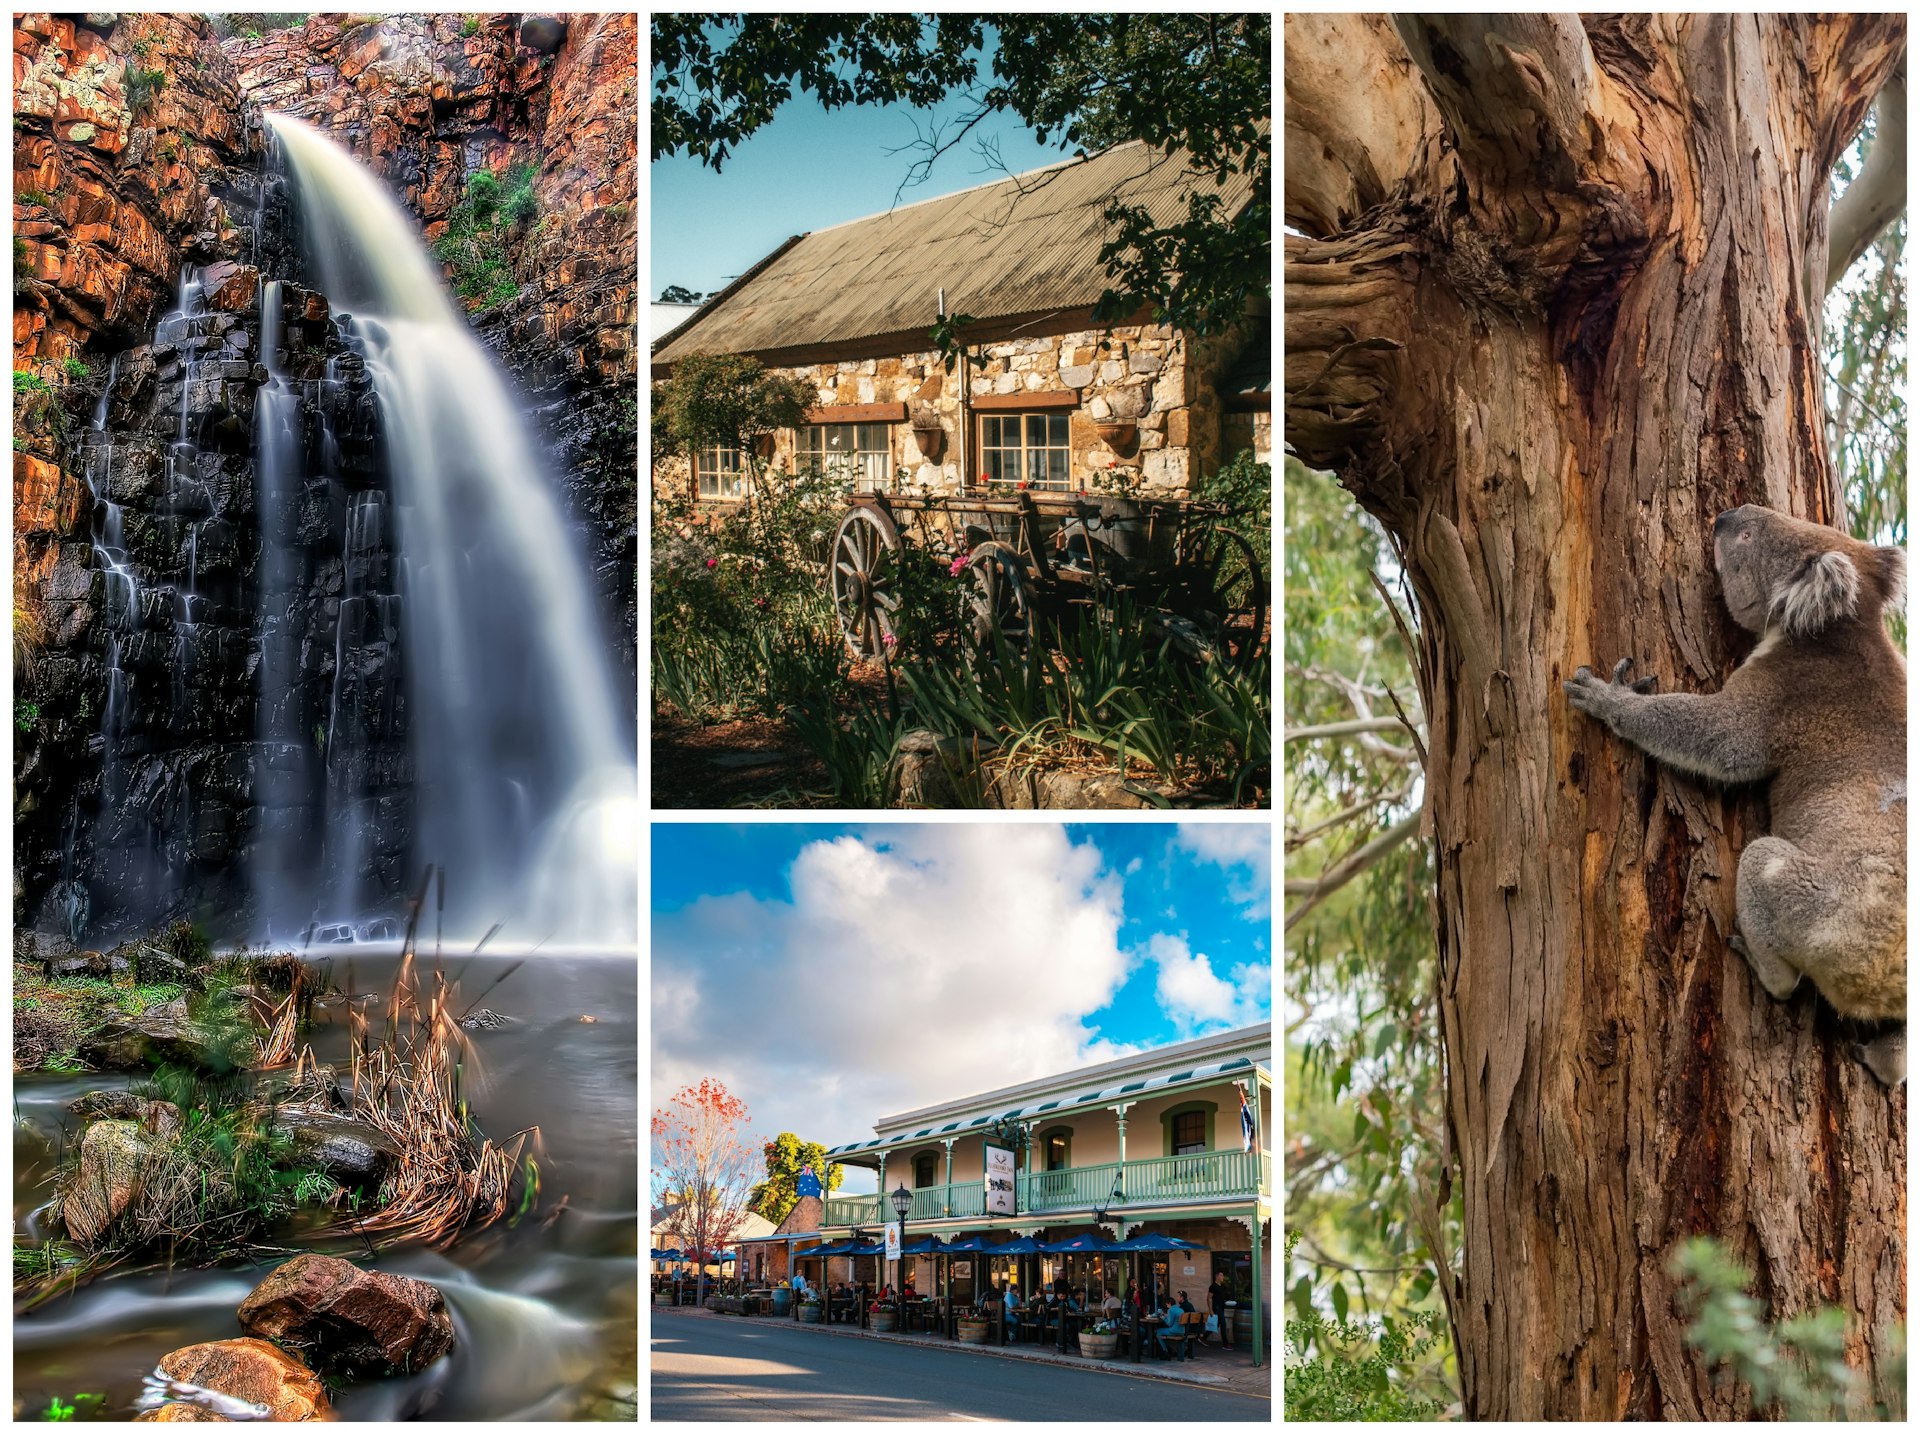 Shots of a waterfall, trees with autumn leaves, a traditional Australian pub and a koala climbing a tree